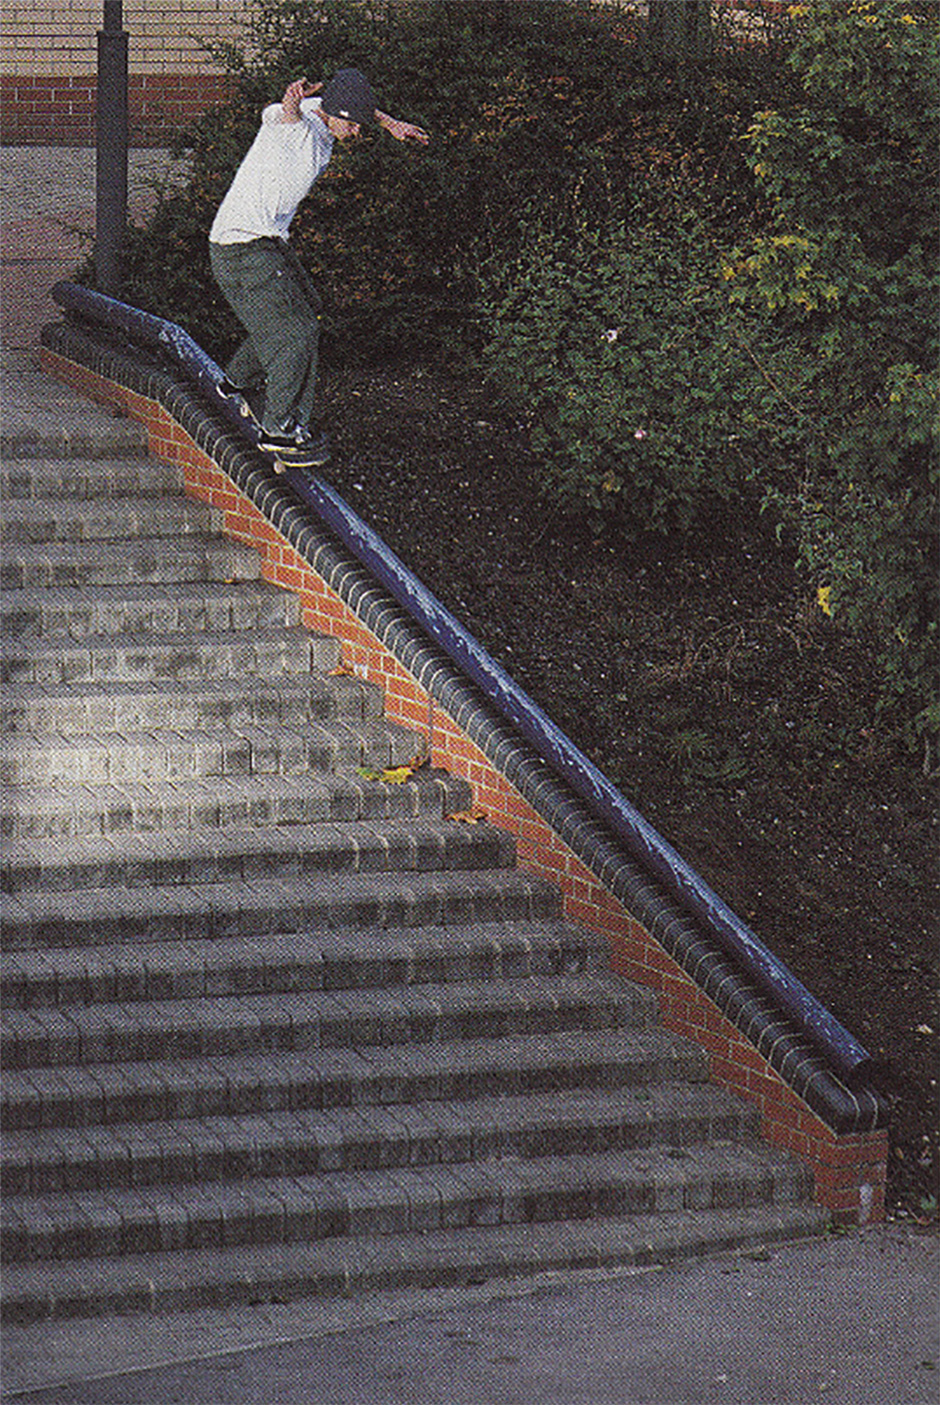 Gnarly 50-50 from Playing Fields featured in video review in Sidewalk. Photo: Andy Horsley